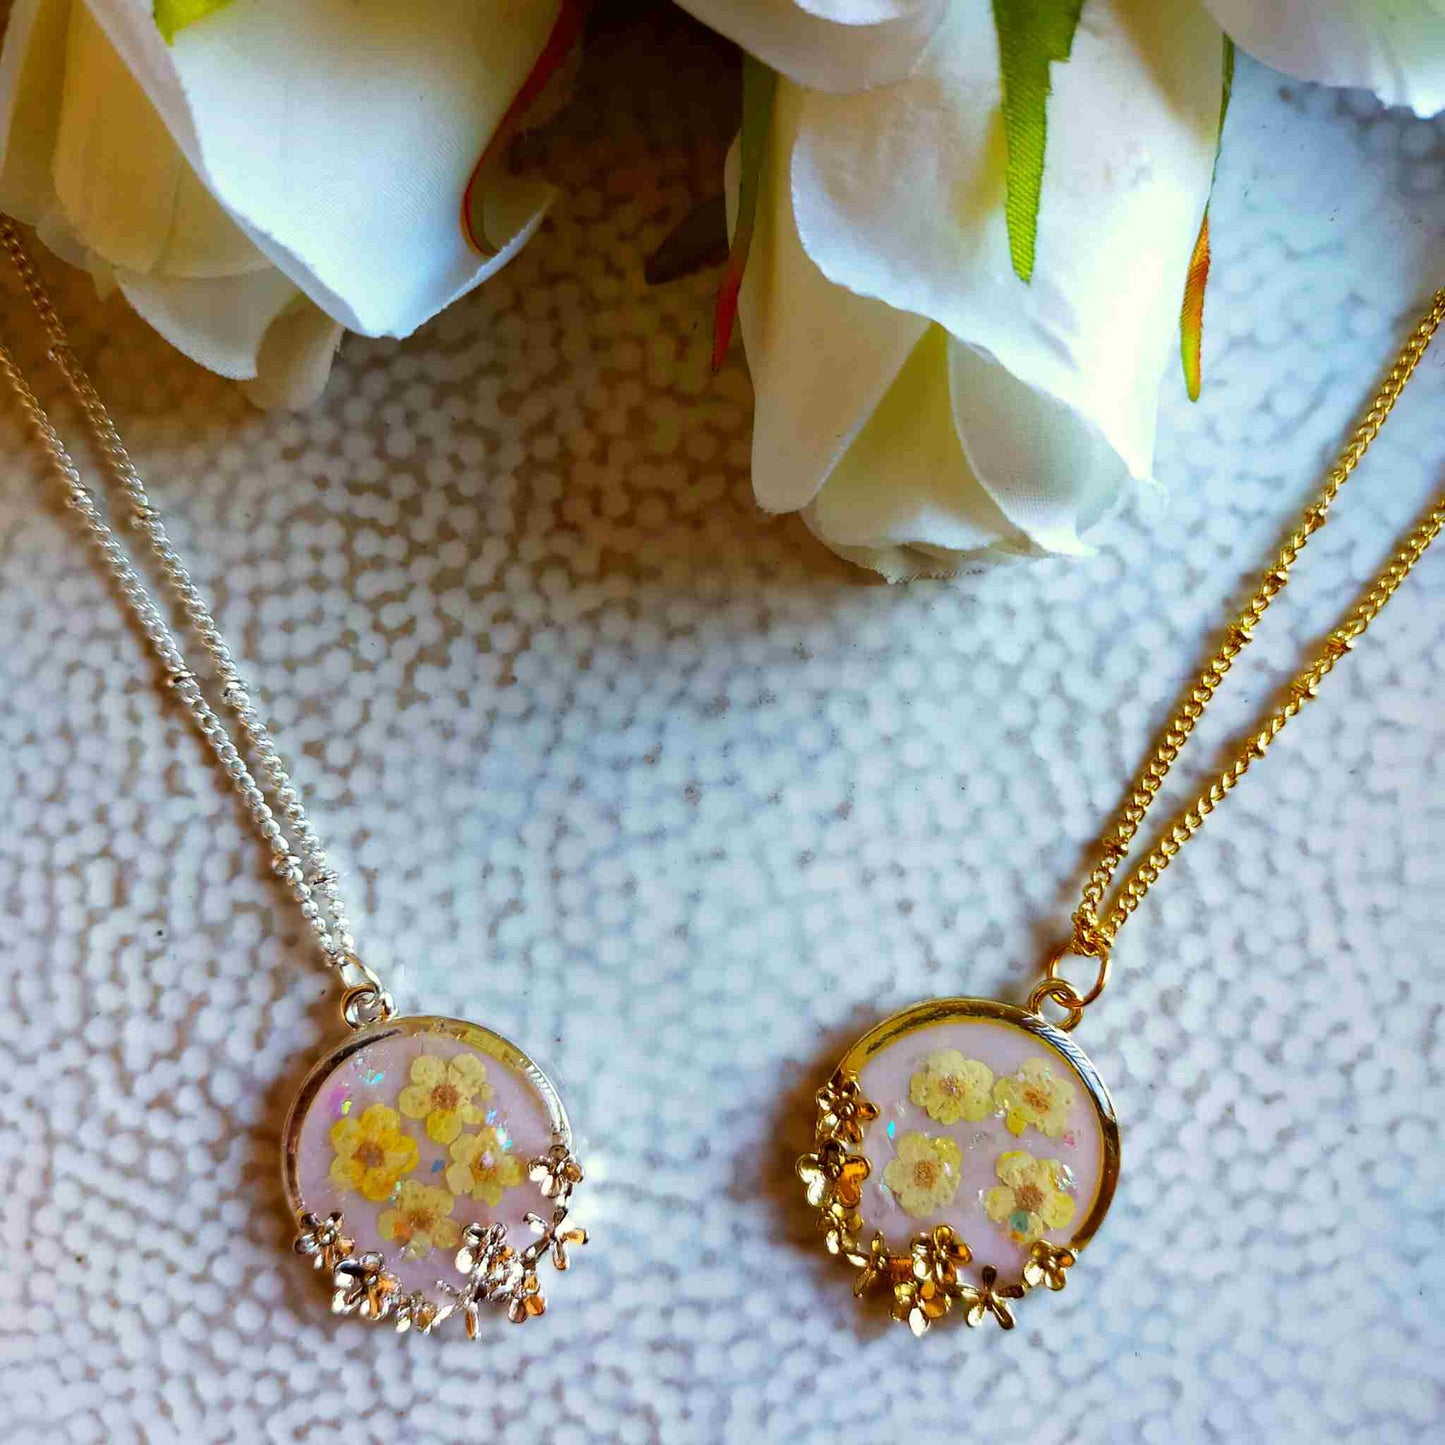 "Lucia" Cream Blossom on Pink Resin Flower Necklace